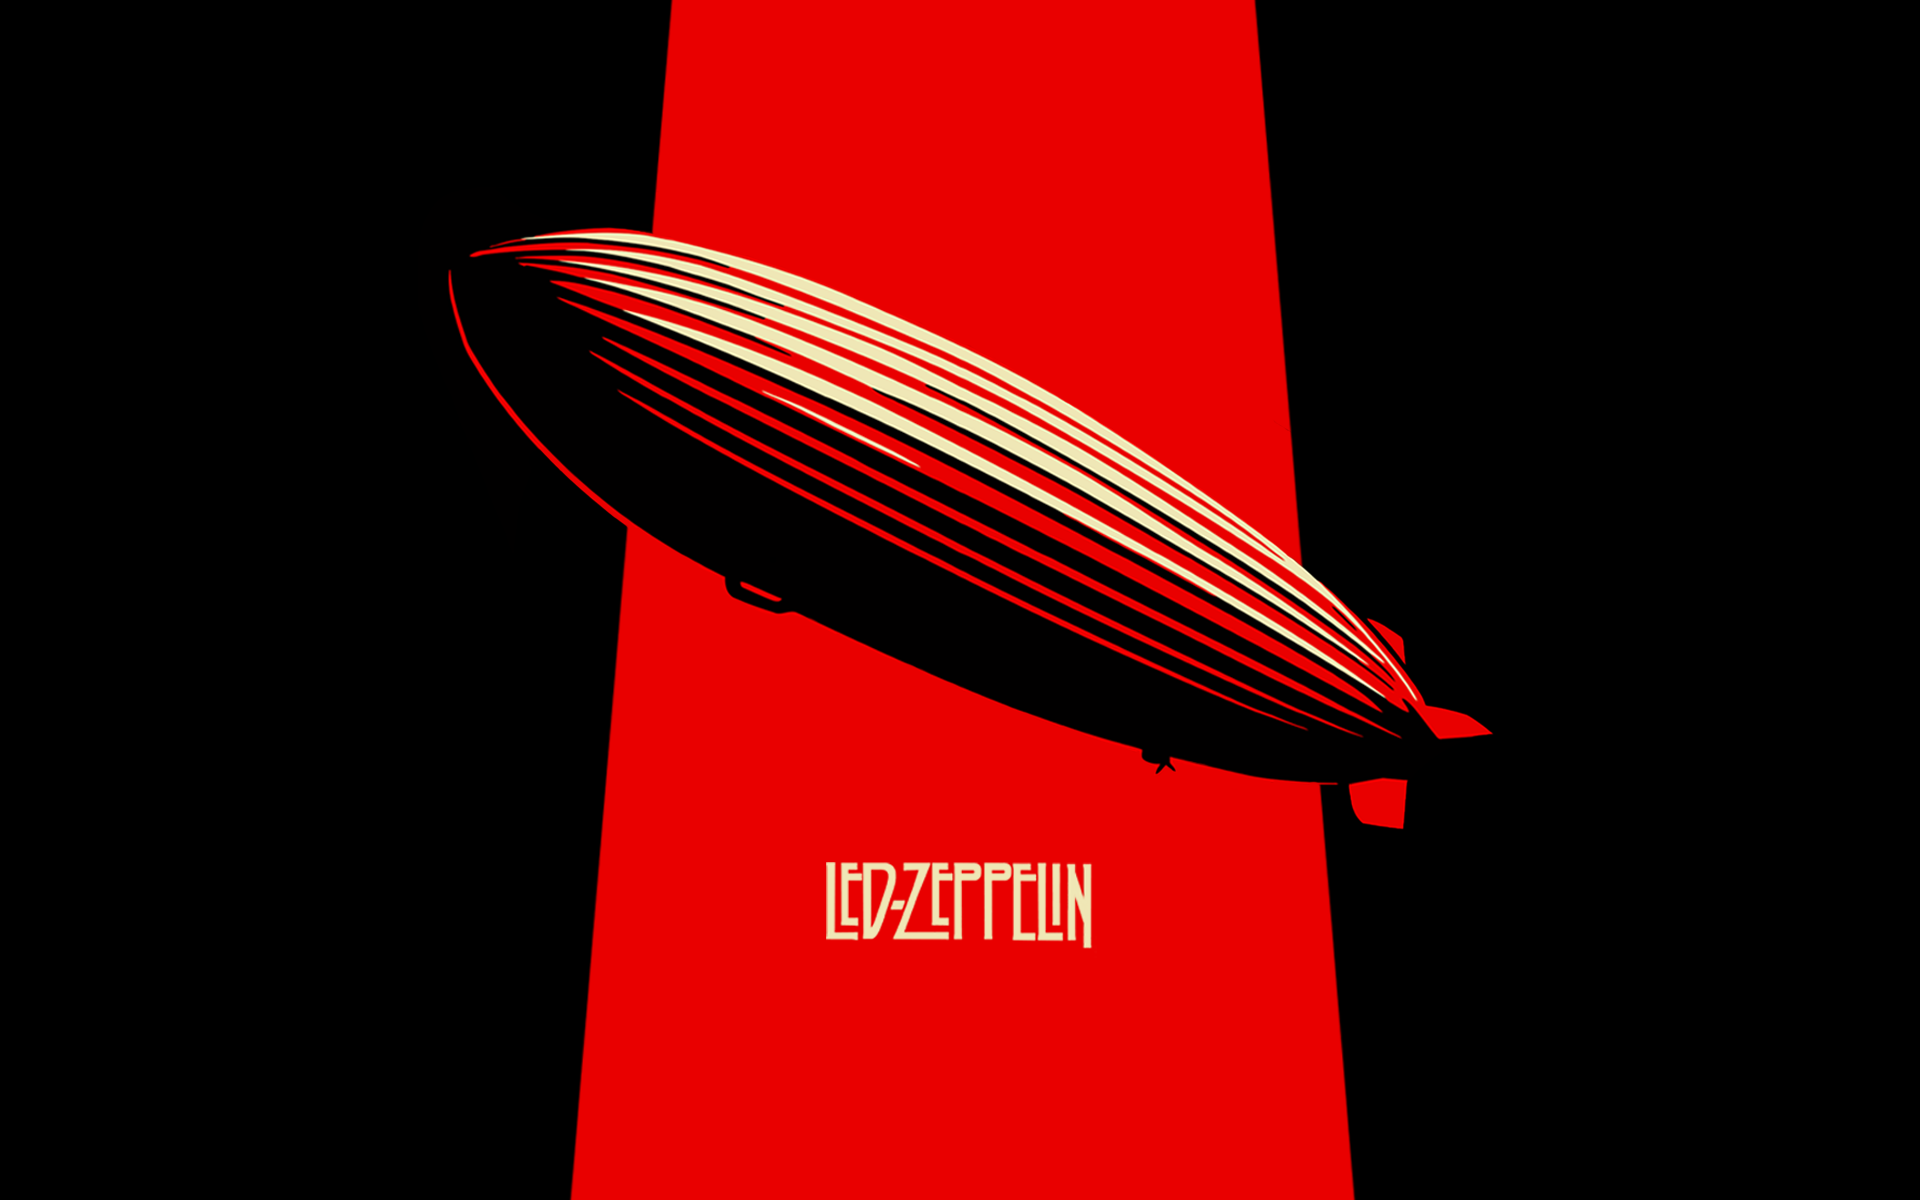 Led Zeppelin Full HD Wallpaper and Background Image | 1920x1200 | ID:392102